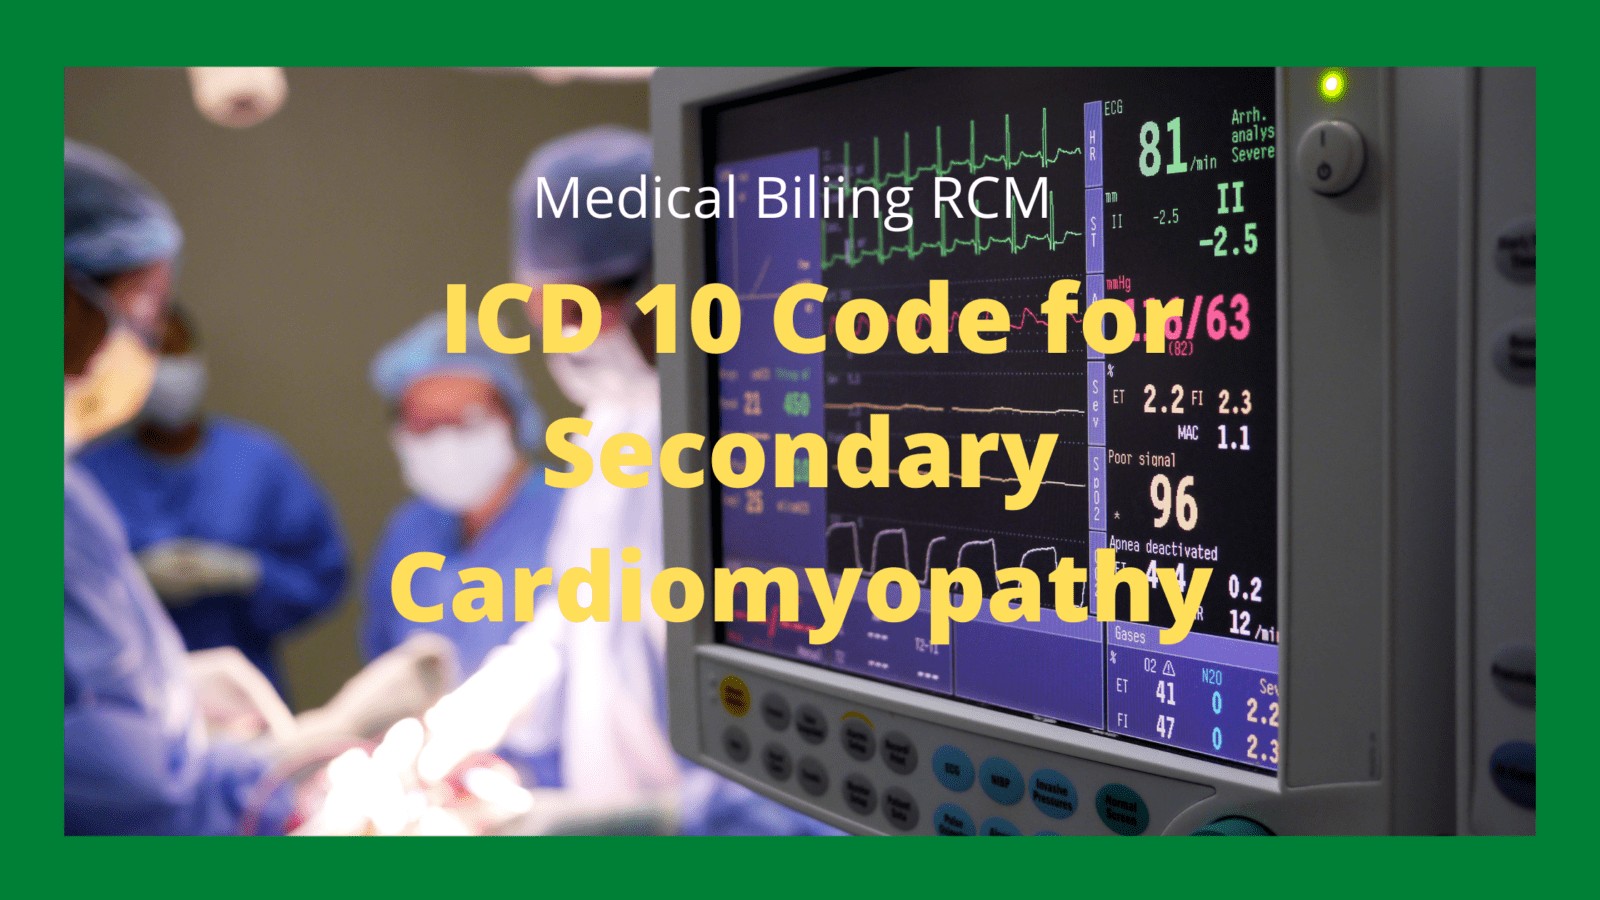 ICD 10 Code for Secondary Cardiomyopathy